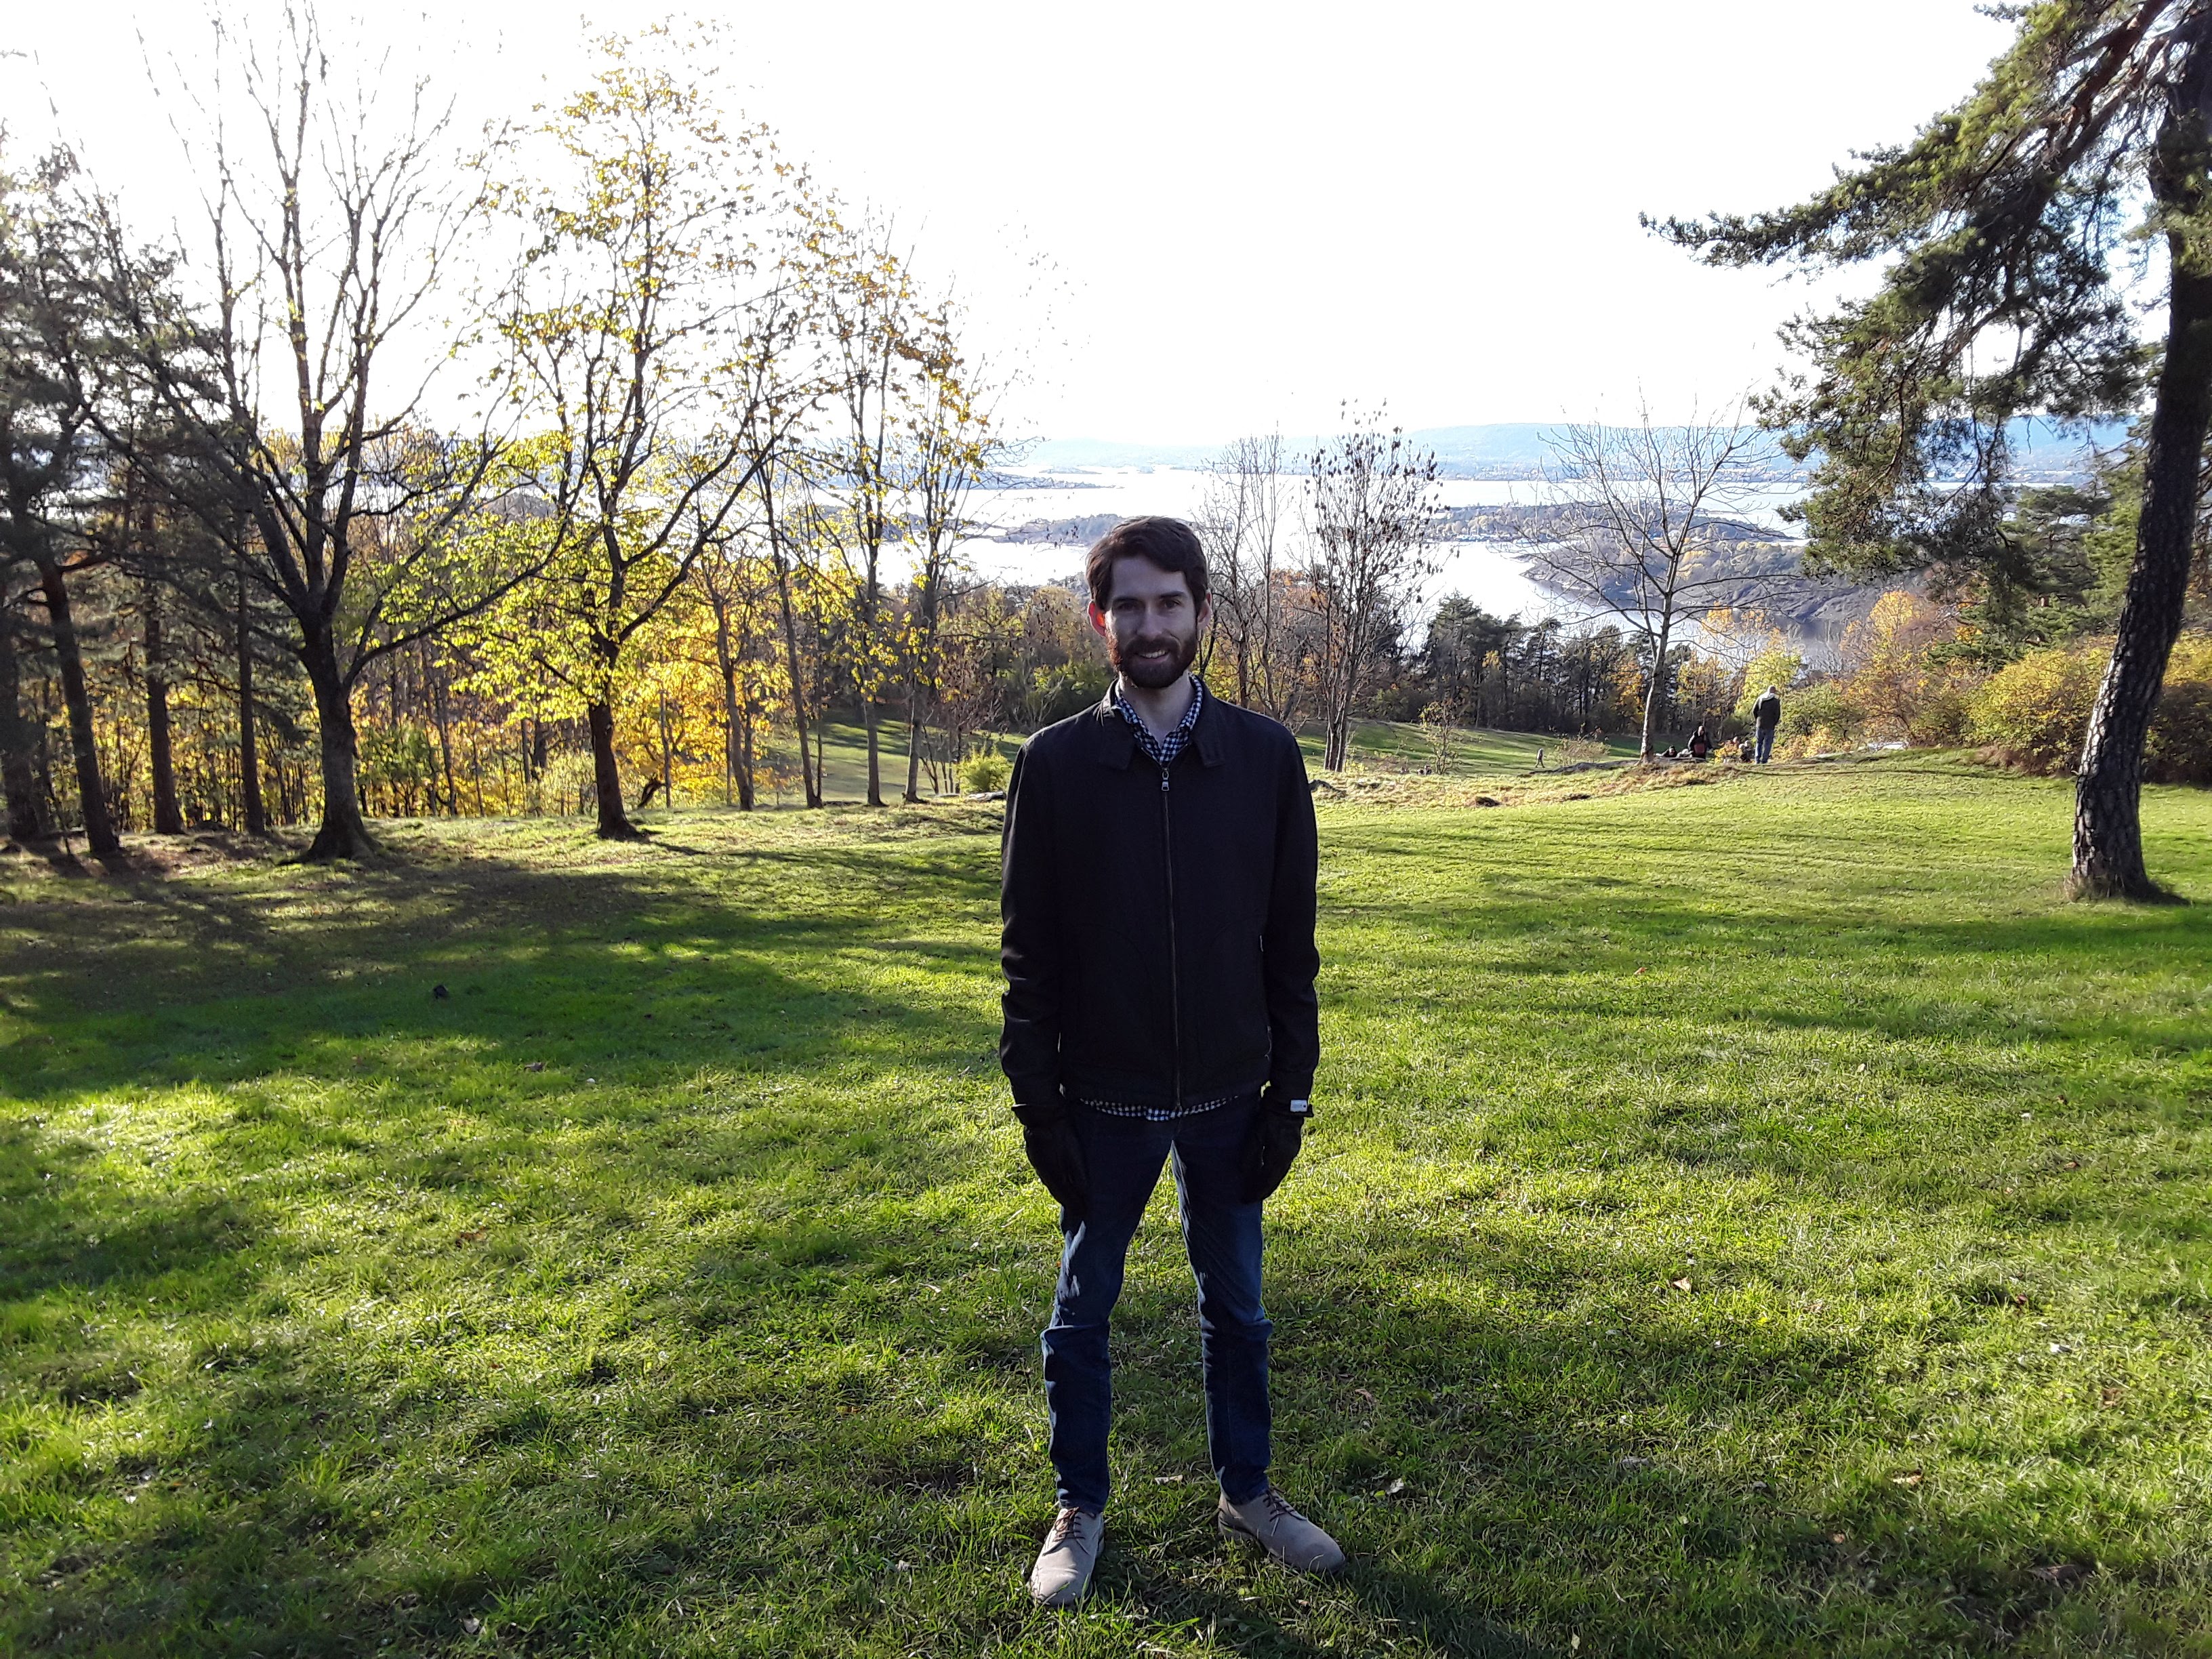 A view of Ross Godfrey standing in a park on a hill, overlooking a body of water with islands.